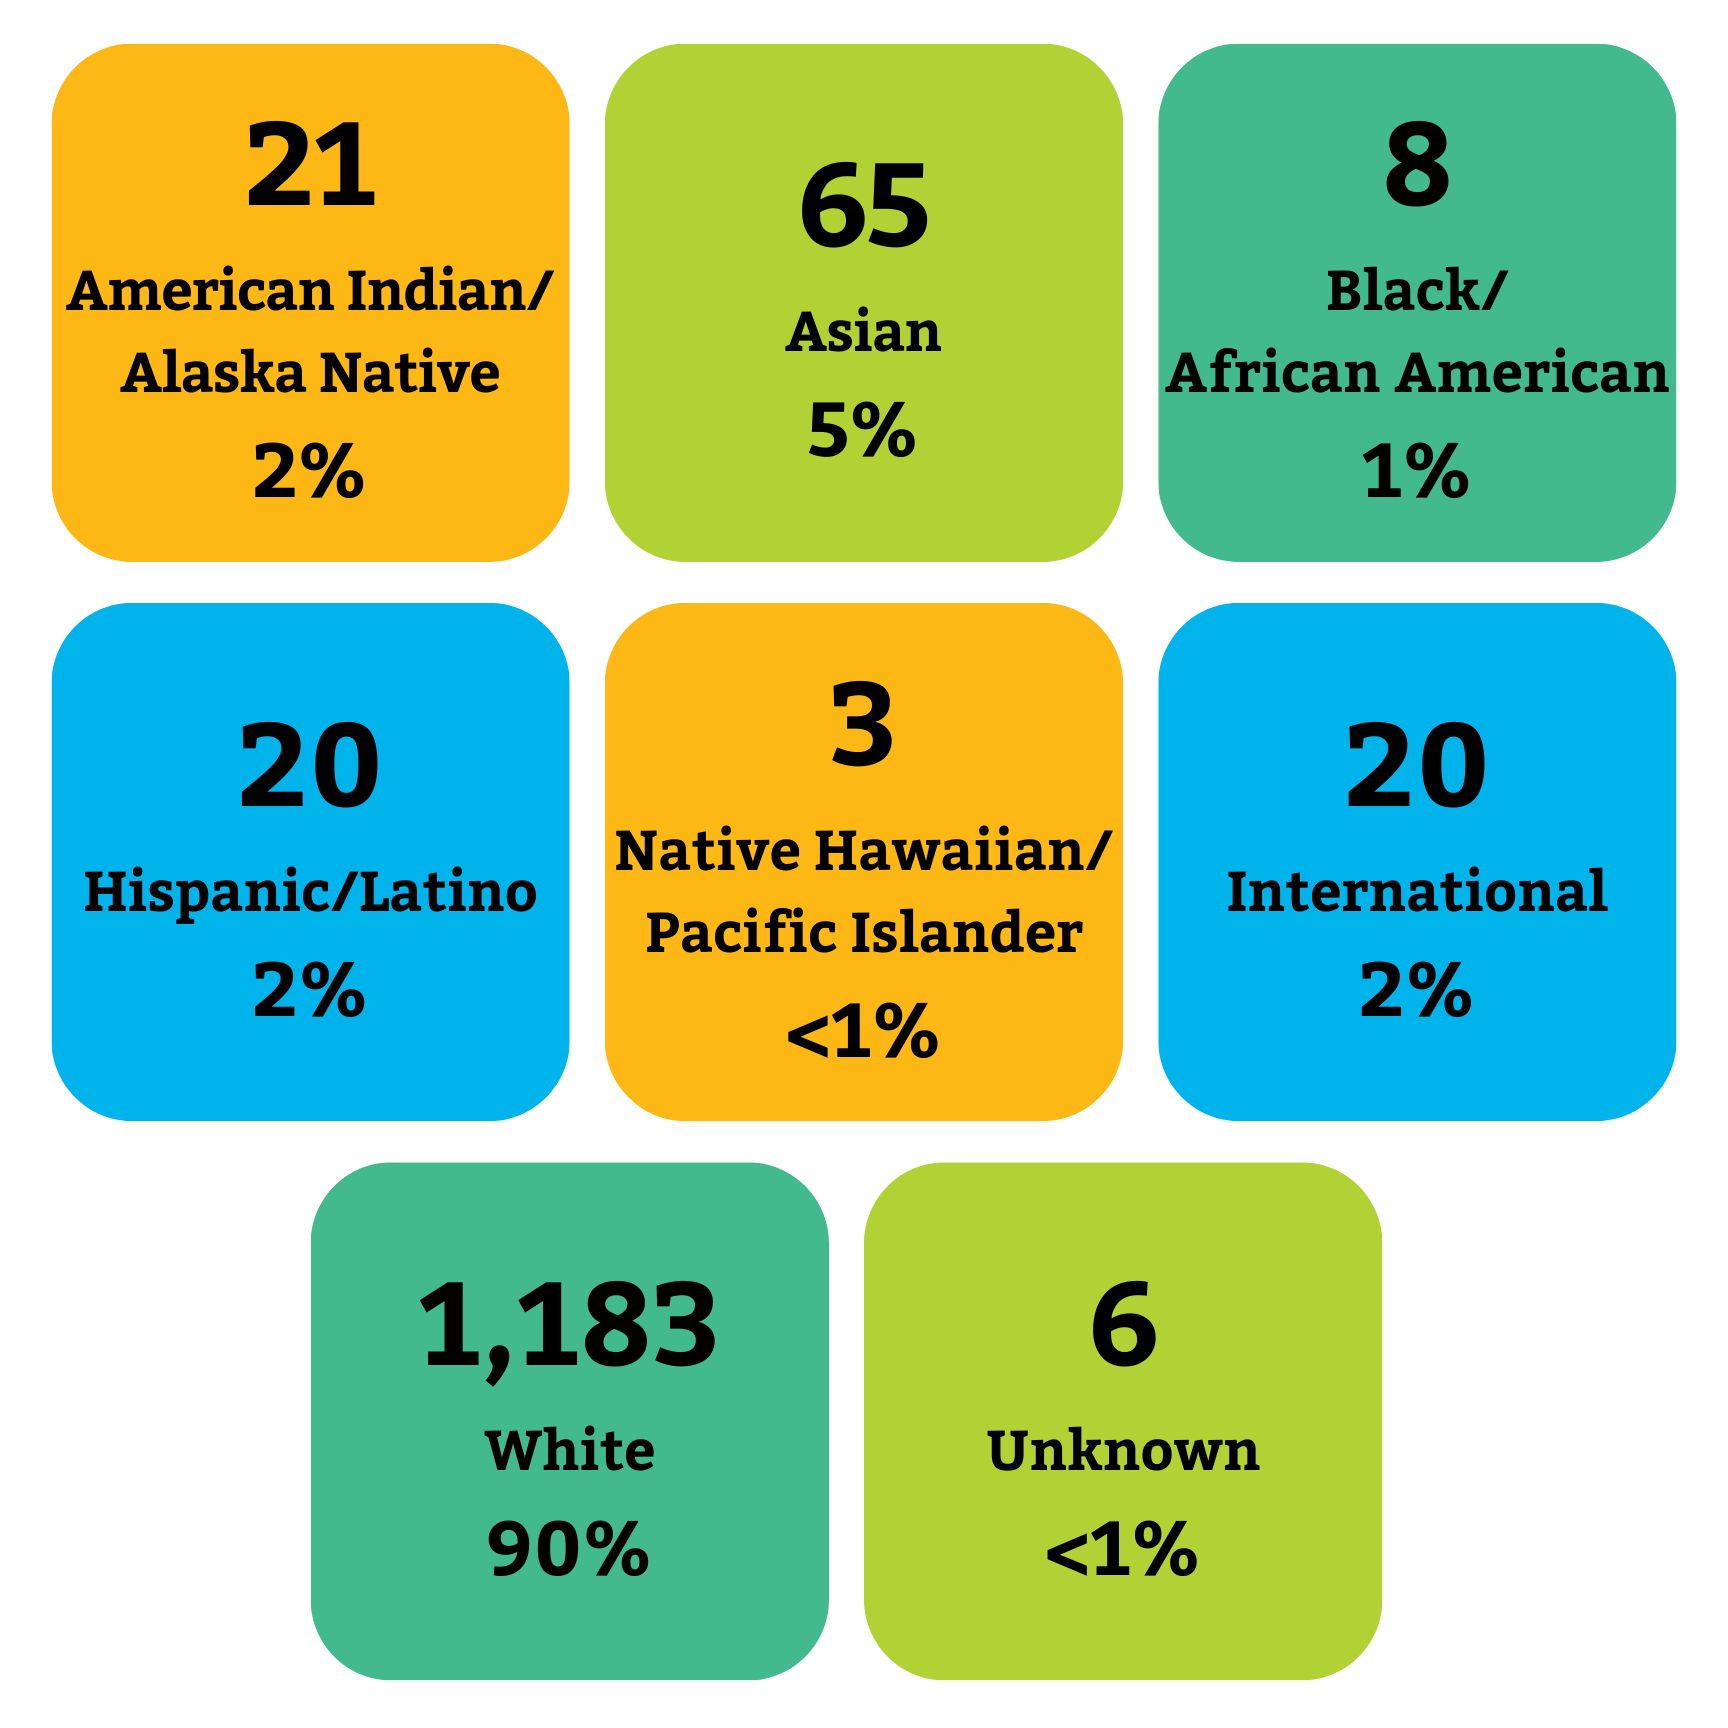 Graphic showing the demographics of faculty by race and ethnicity. 21 American Indian/Alaska Native (2%), 65 Asian (5%), 8 Black/African American (1%), 20 Hispanic/Latino (2%), 3 Native Hawaiian/Pacific Islander (<1%), 20 International (2%), 1,183 White (90%), 6 Unknown (<1%).